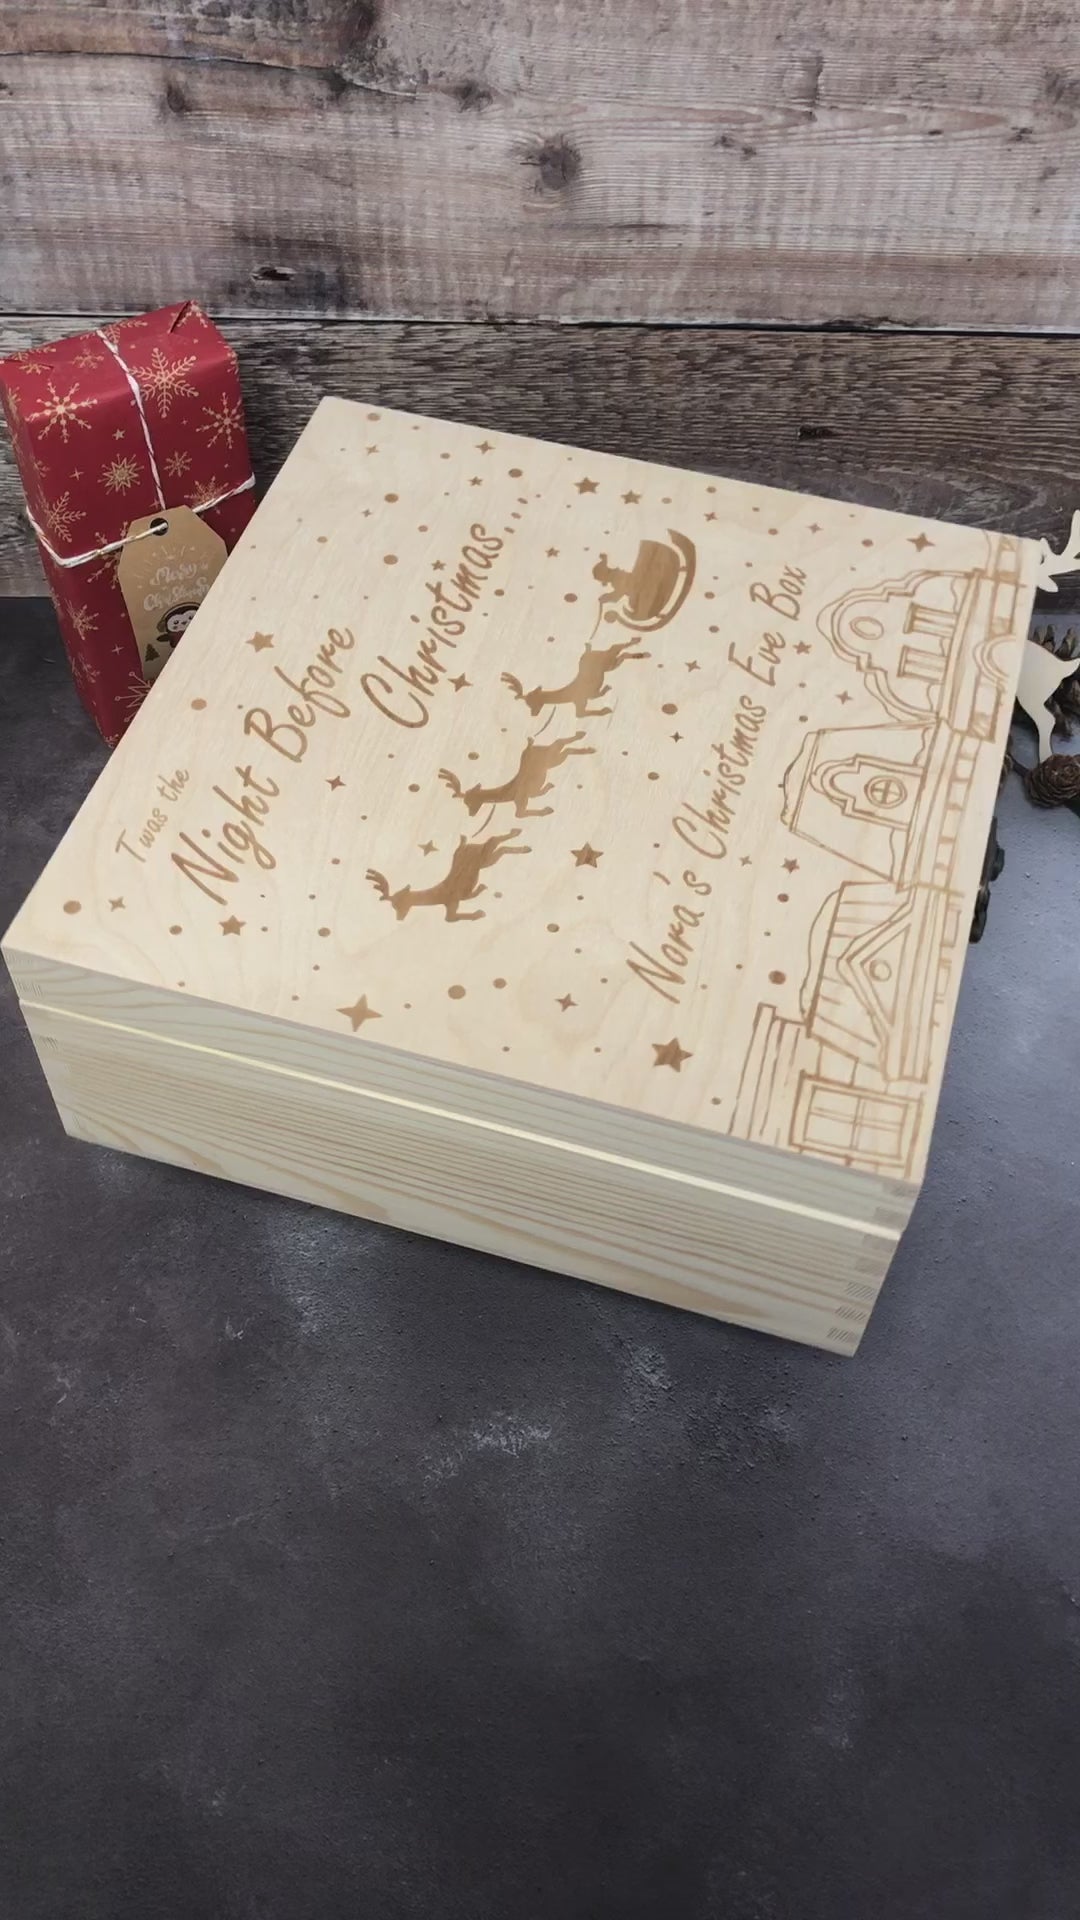 Personalised Wooden Christmas Eve Box - The Night Before Christmas